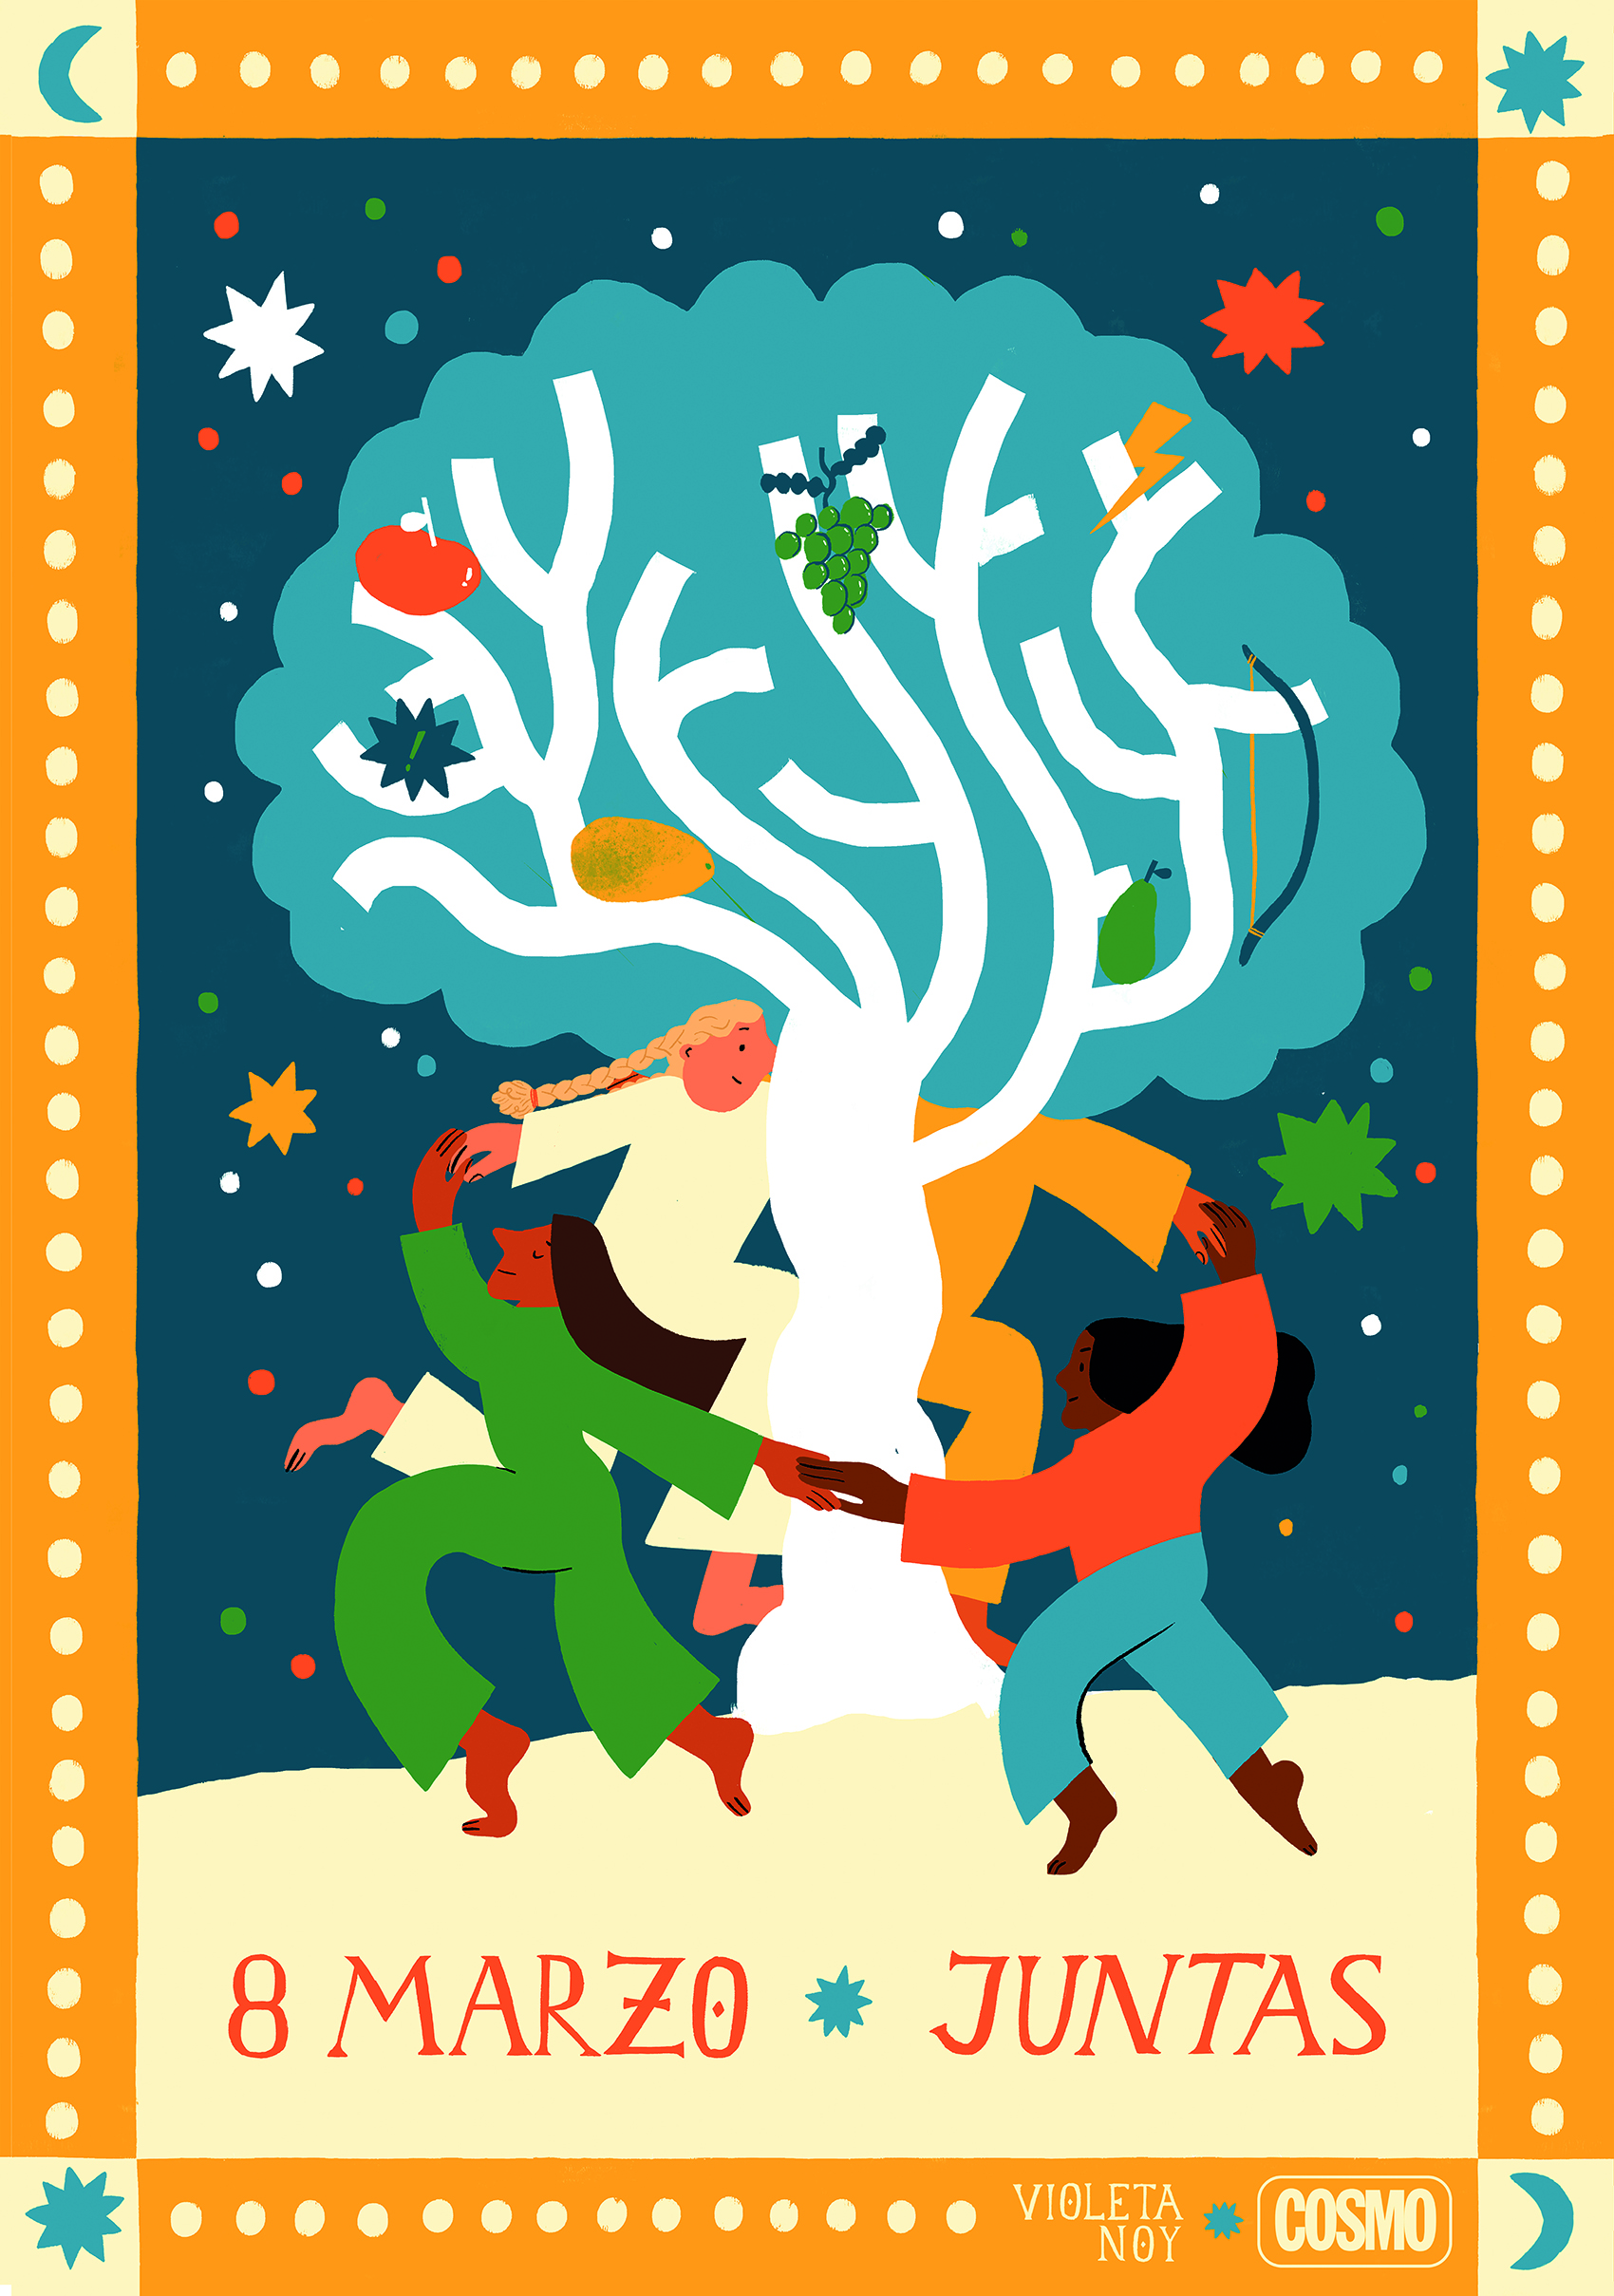 poster-international-womens-day-canal-women-dancing-tree-growing-cosmo-feminism-feminist-illustration-violeta-noy